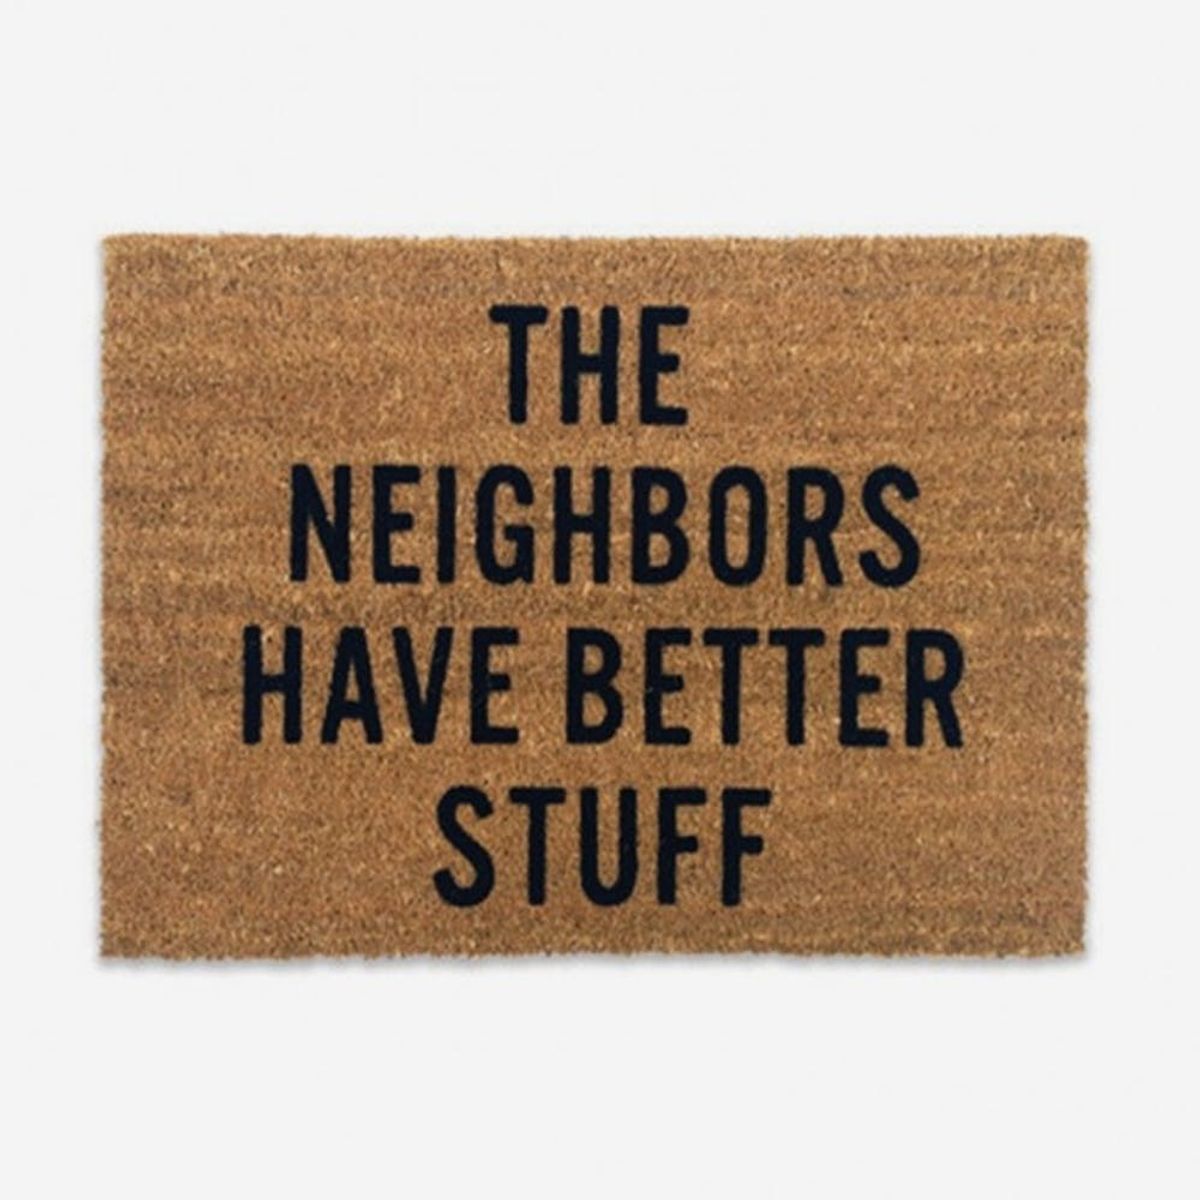 14 Creative Housewarming Gifts for the Friend That Just Moved In